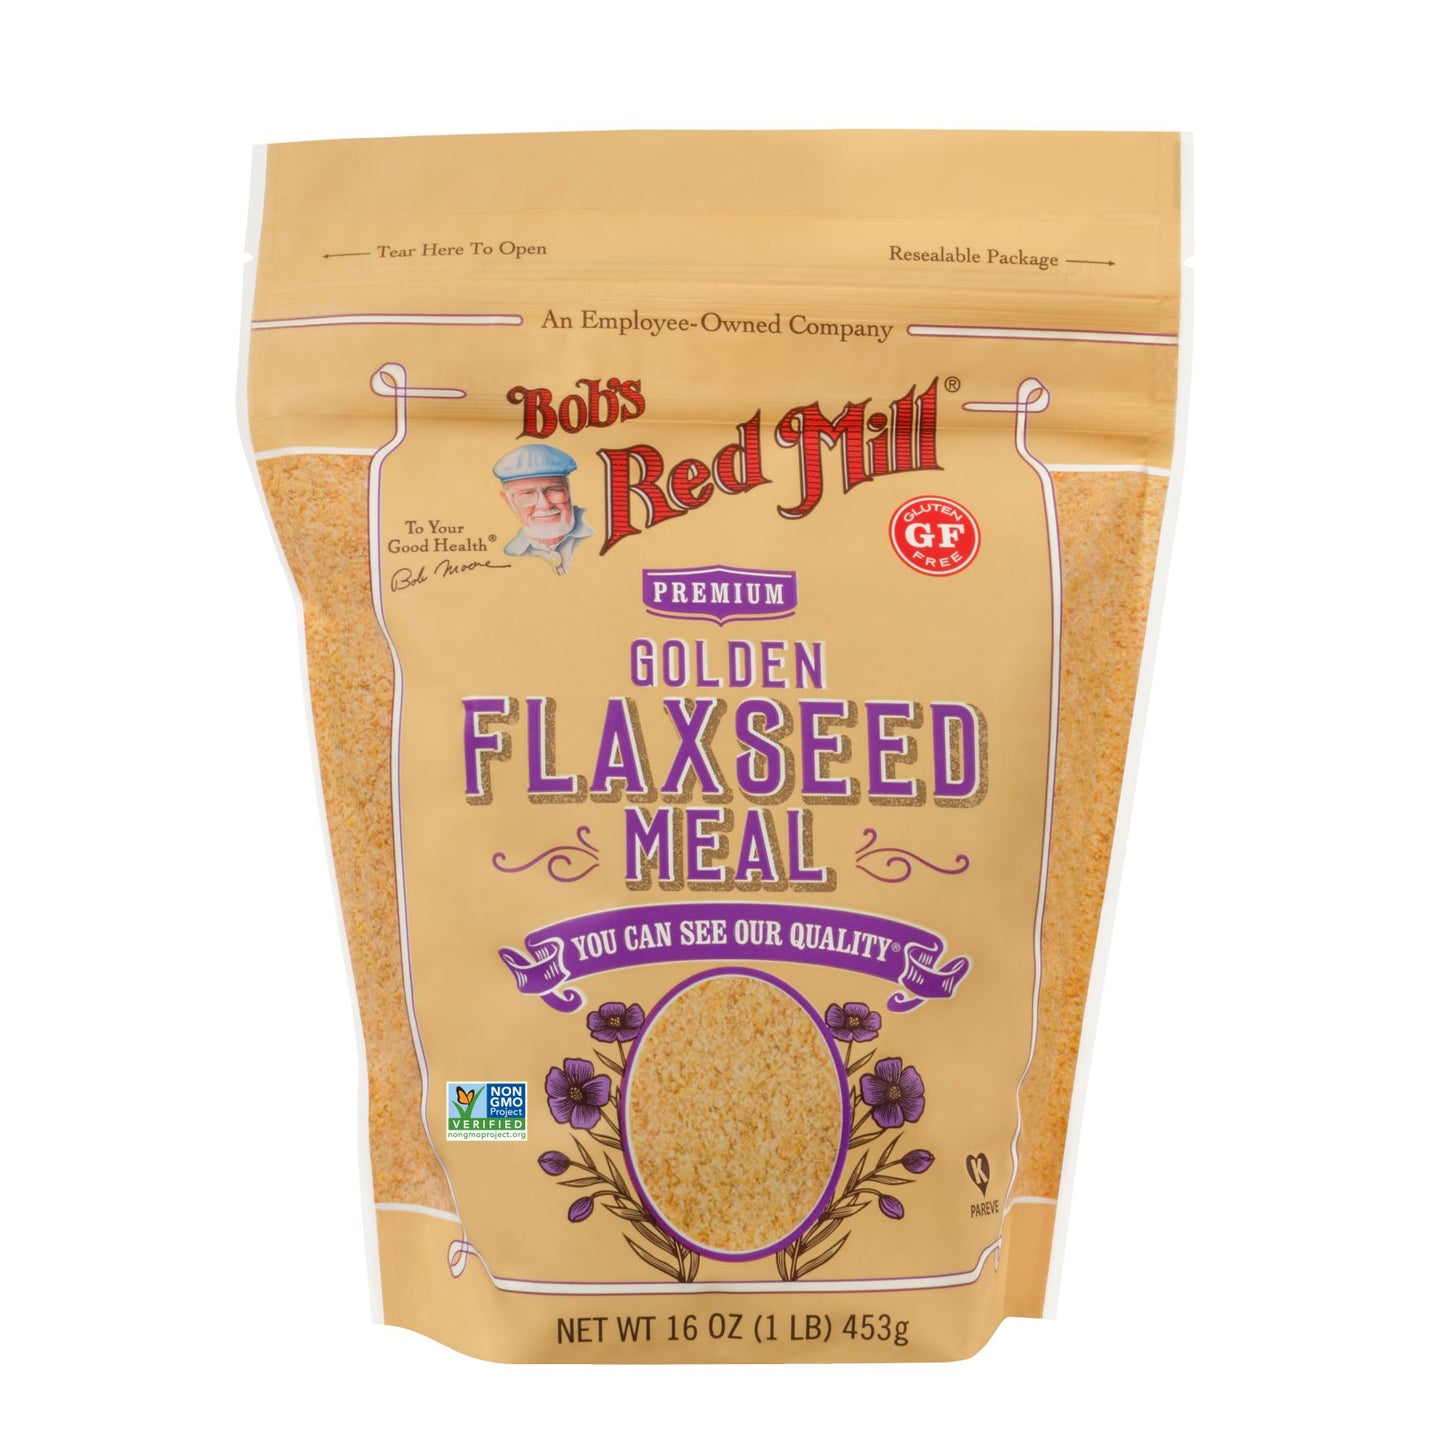 Bob's Red Mill - Golden Flaxseed Meal (16 oz)